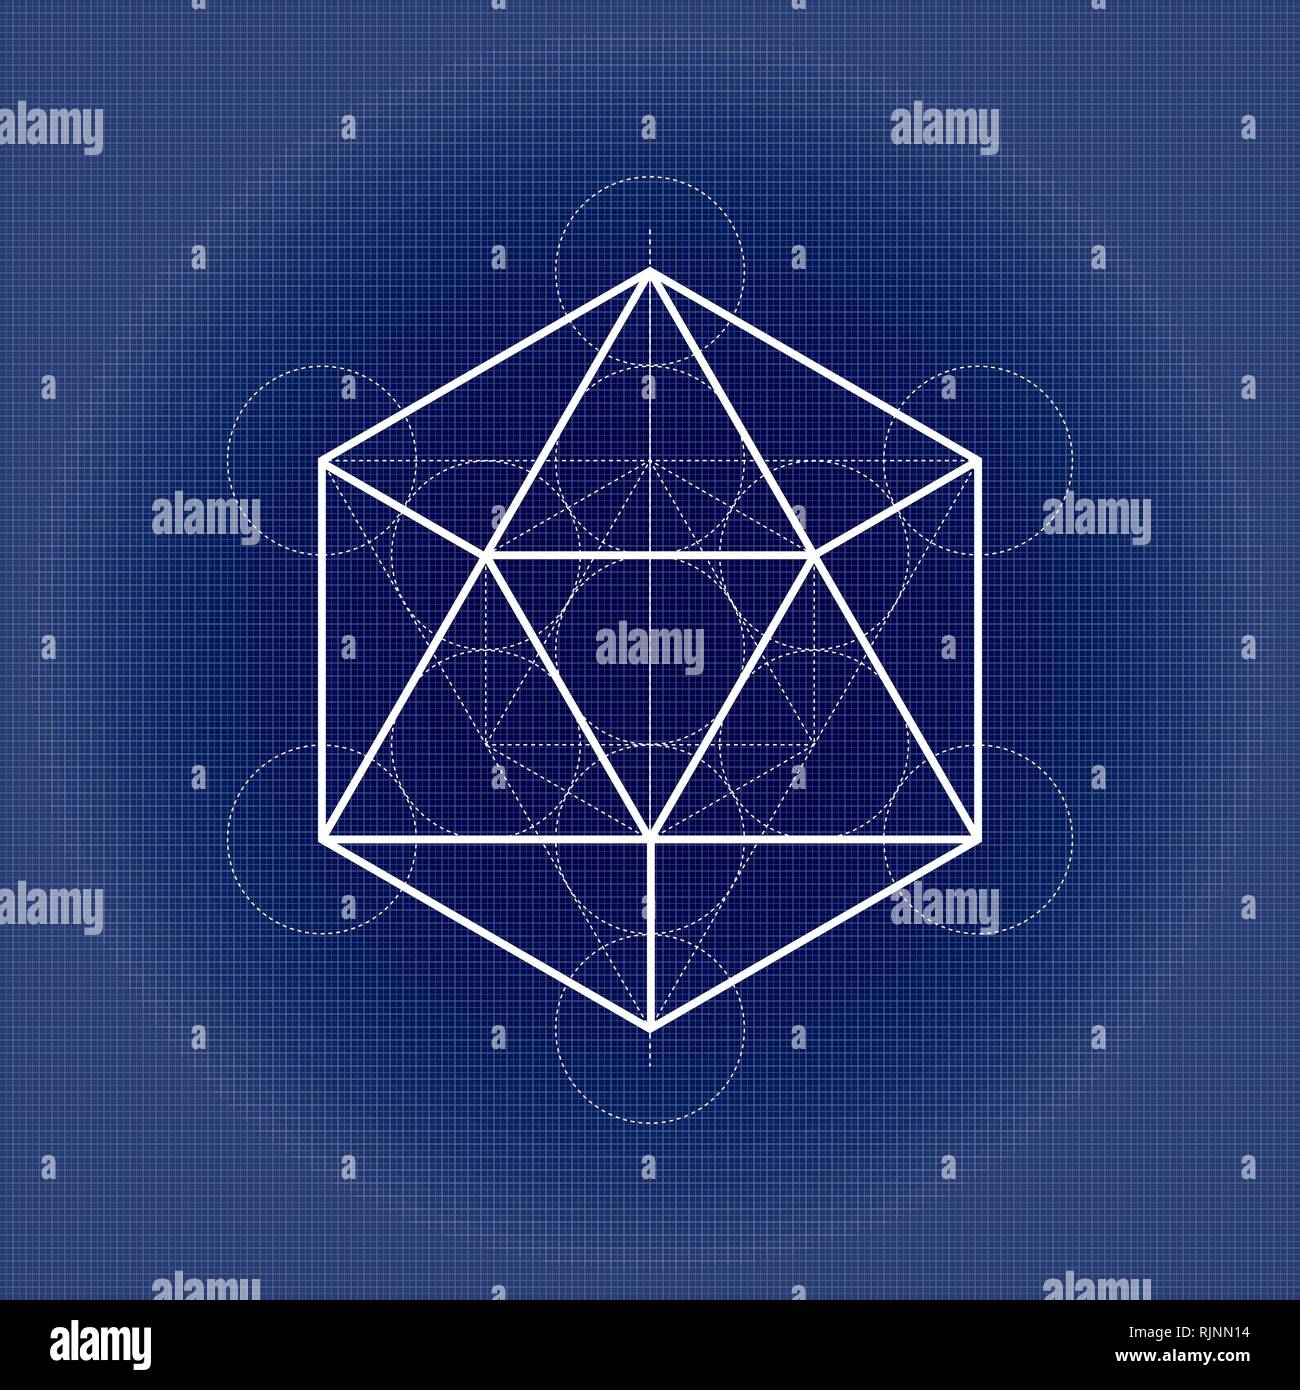 Icosahedron from Metatrons cube, sacred geometry illustration on technical paper Stock Vector